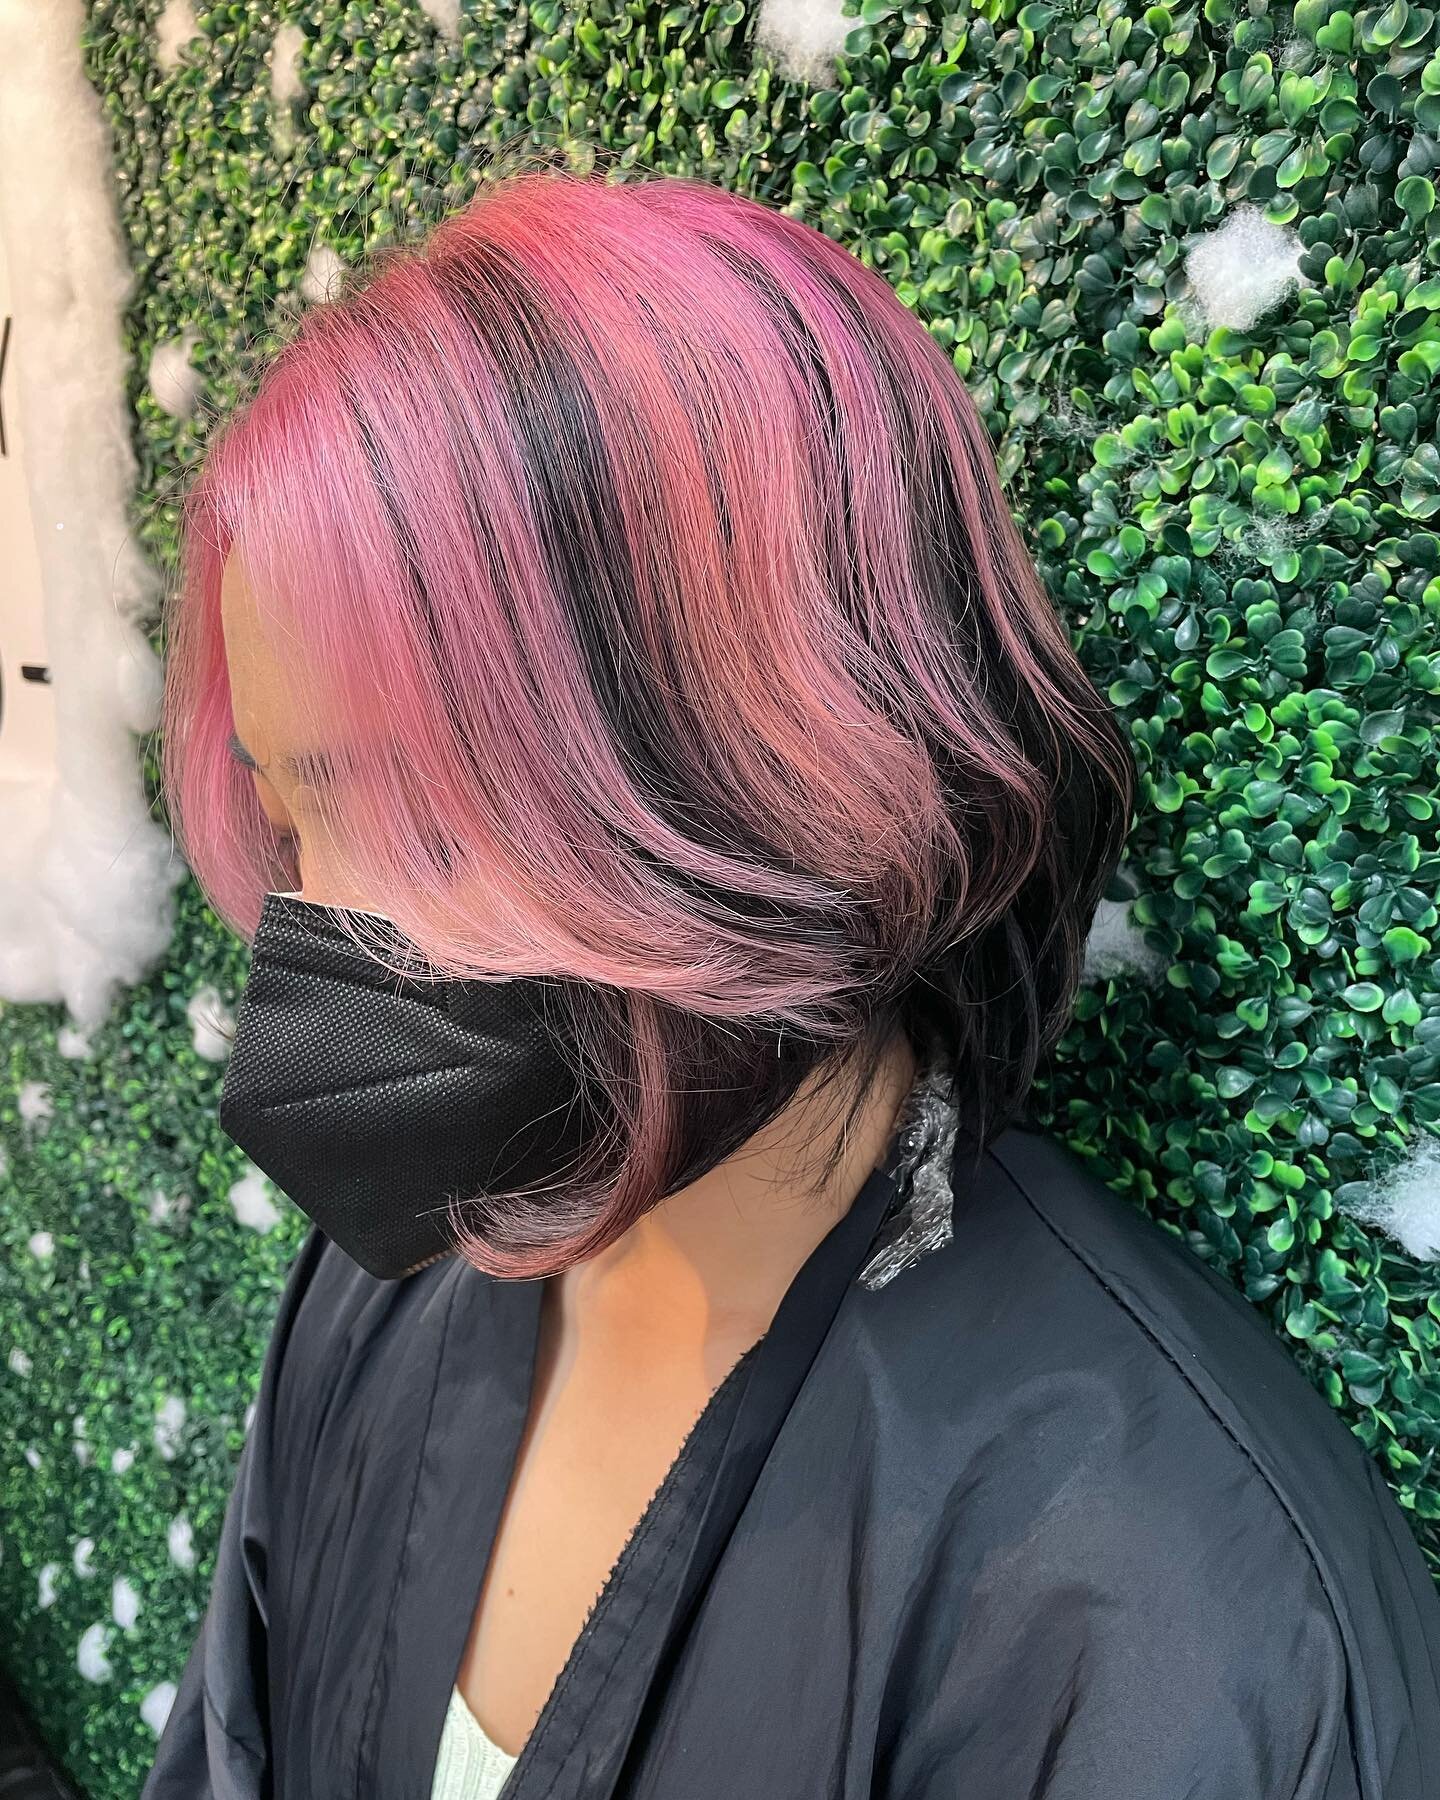 Fun color 💋 
#pinkpeekaboohighlights 

#salonbyyoo #onlyou

For customer satisfaction, a 1:1 consultation will be performed before any service.

For appointment/consultation
DM / call at 8089551600
Email info@salonbyyoo.com
Www.salonbyyoo.com

고객님의 